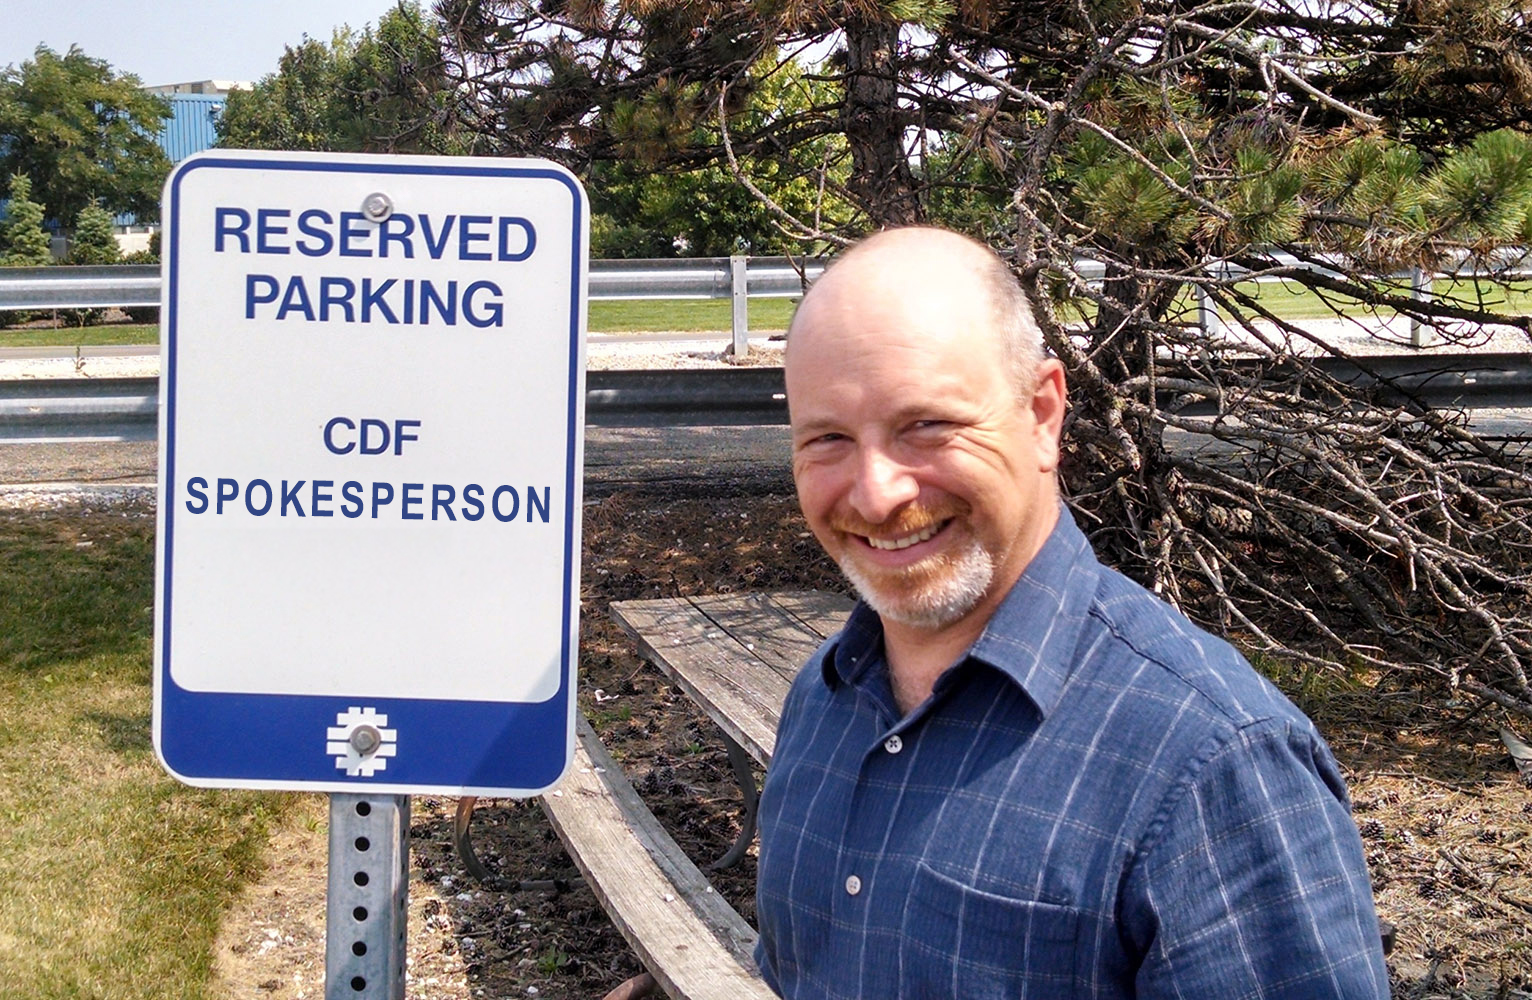 Dr. David Toback standing in front of a reserved parking sign for the CDF spokesperson